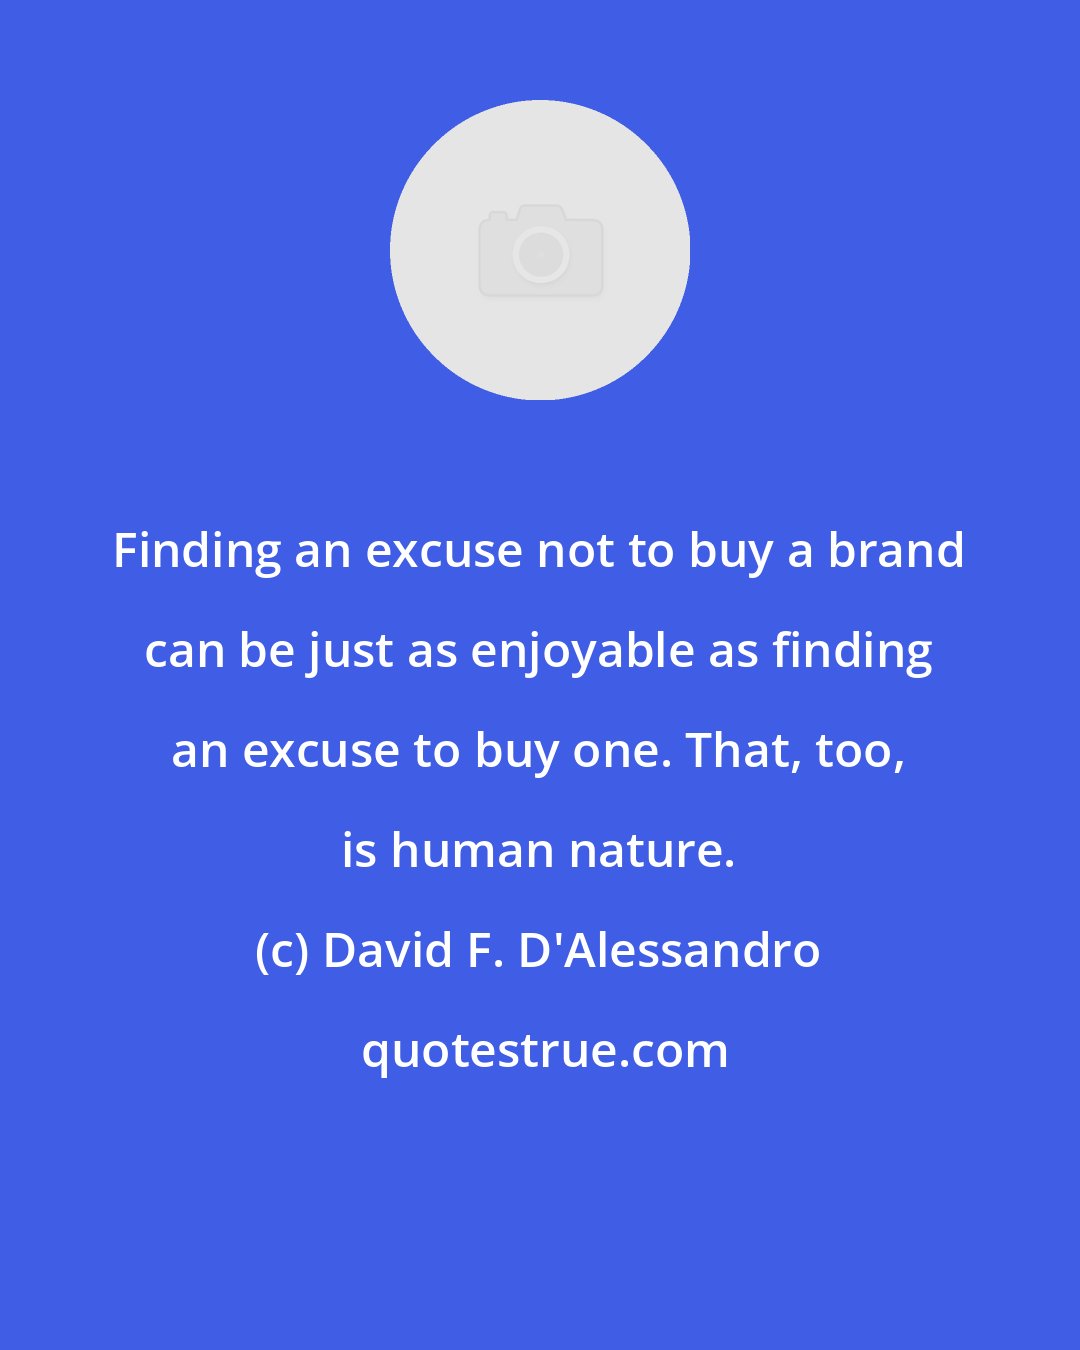 David F. D'Alessandro: Finding an excuse not to buy a brand can be just as enjoyable as finding an excuse to buy one. That, too, is human nature.